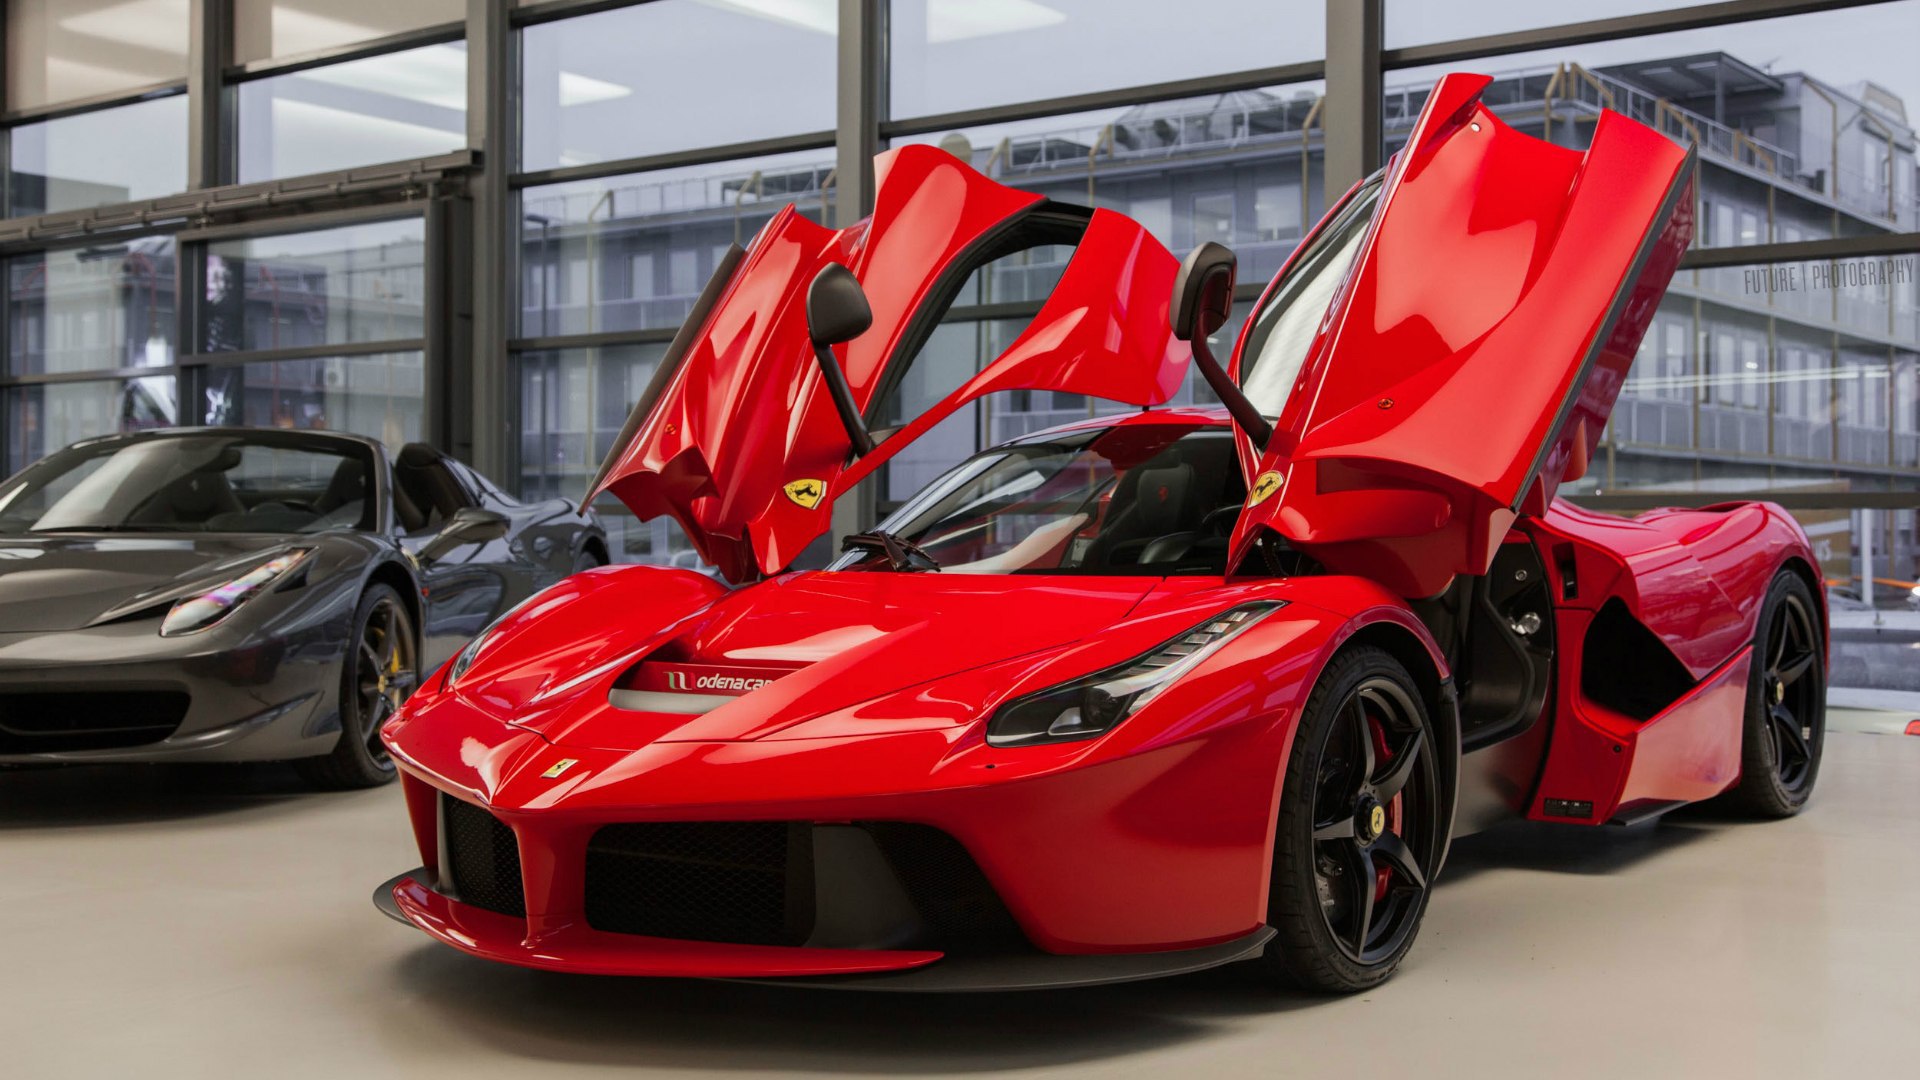 Ferrari Laferrari Car With Open Doors Wallpapers And Images Wallpapers Pictures Photos